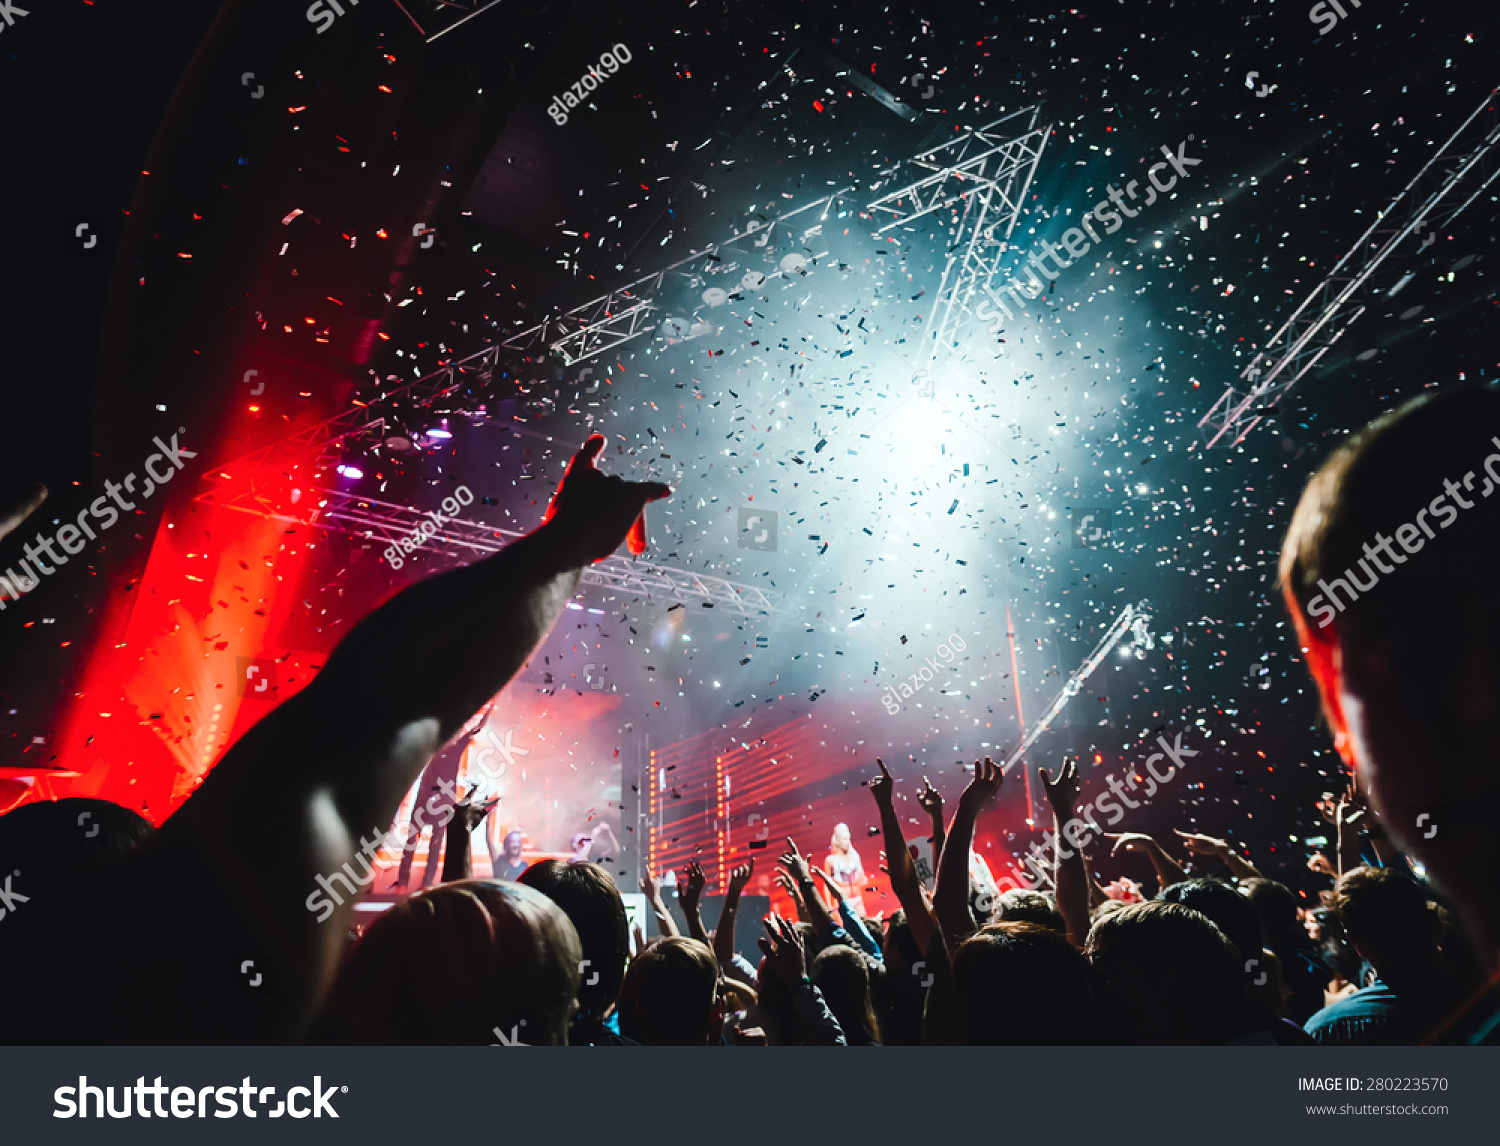 Night Club Party Crowd Hands Up Stock Photo 280223570 : Shutterstock